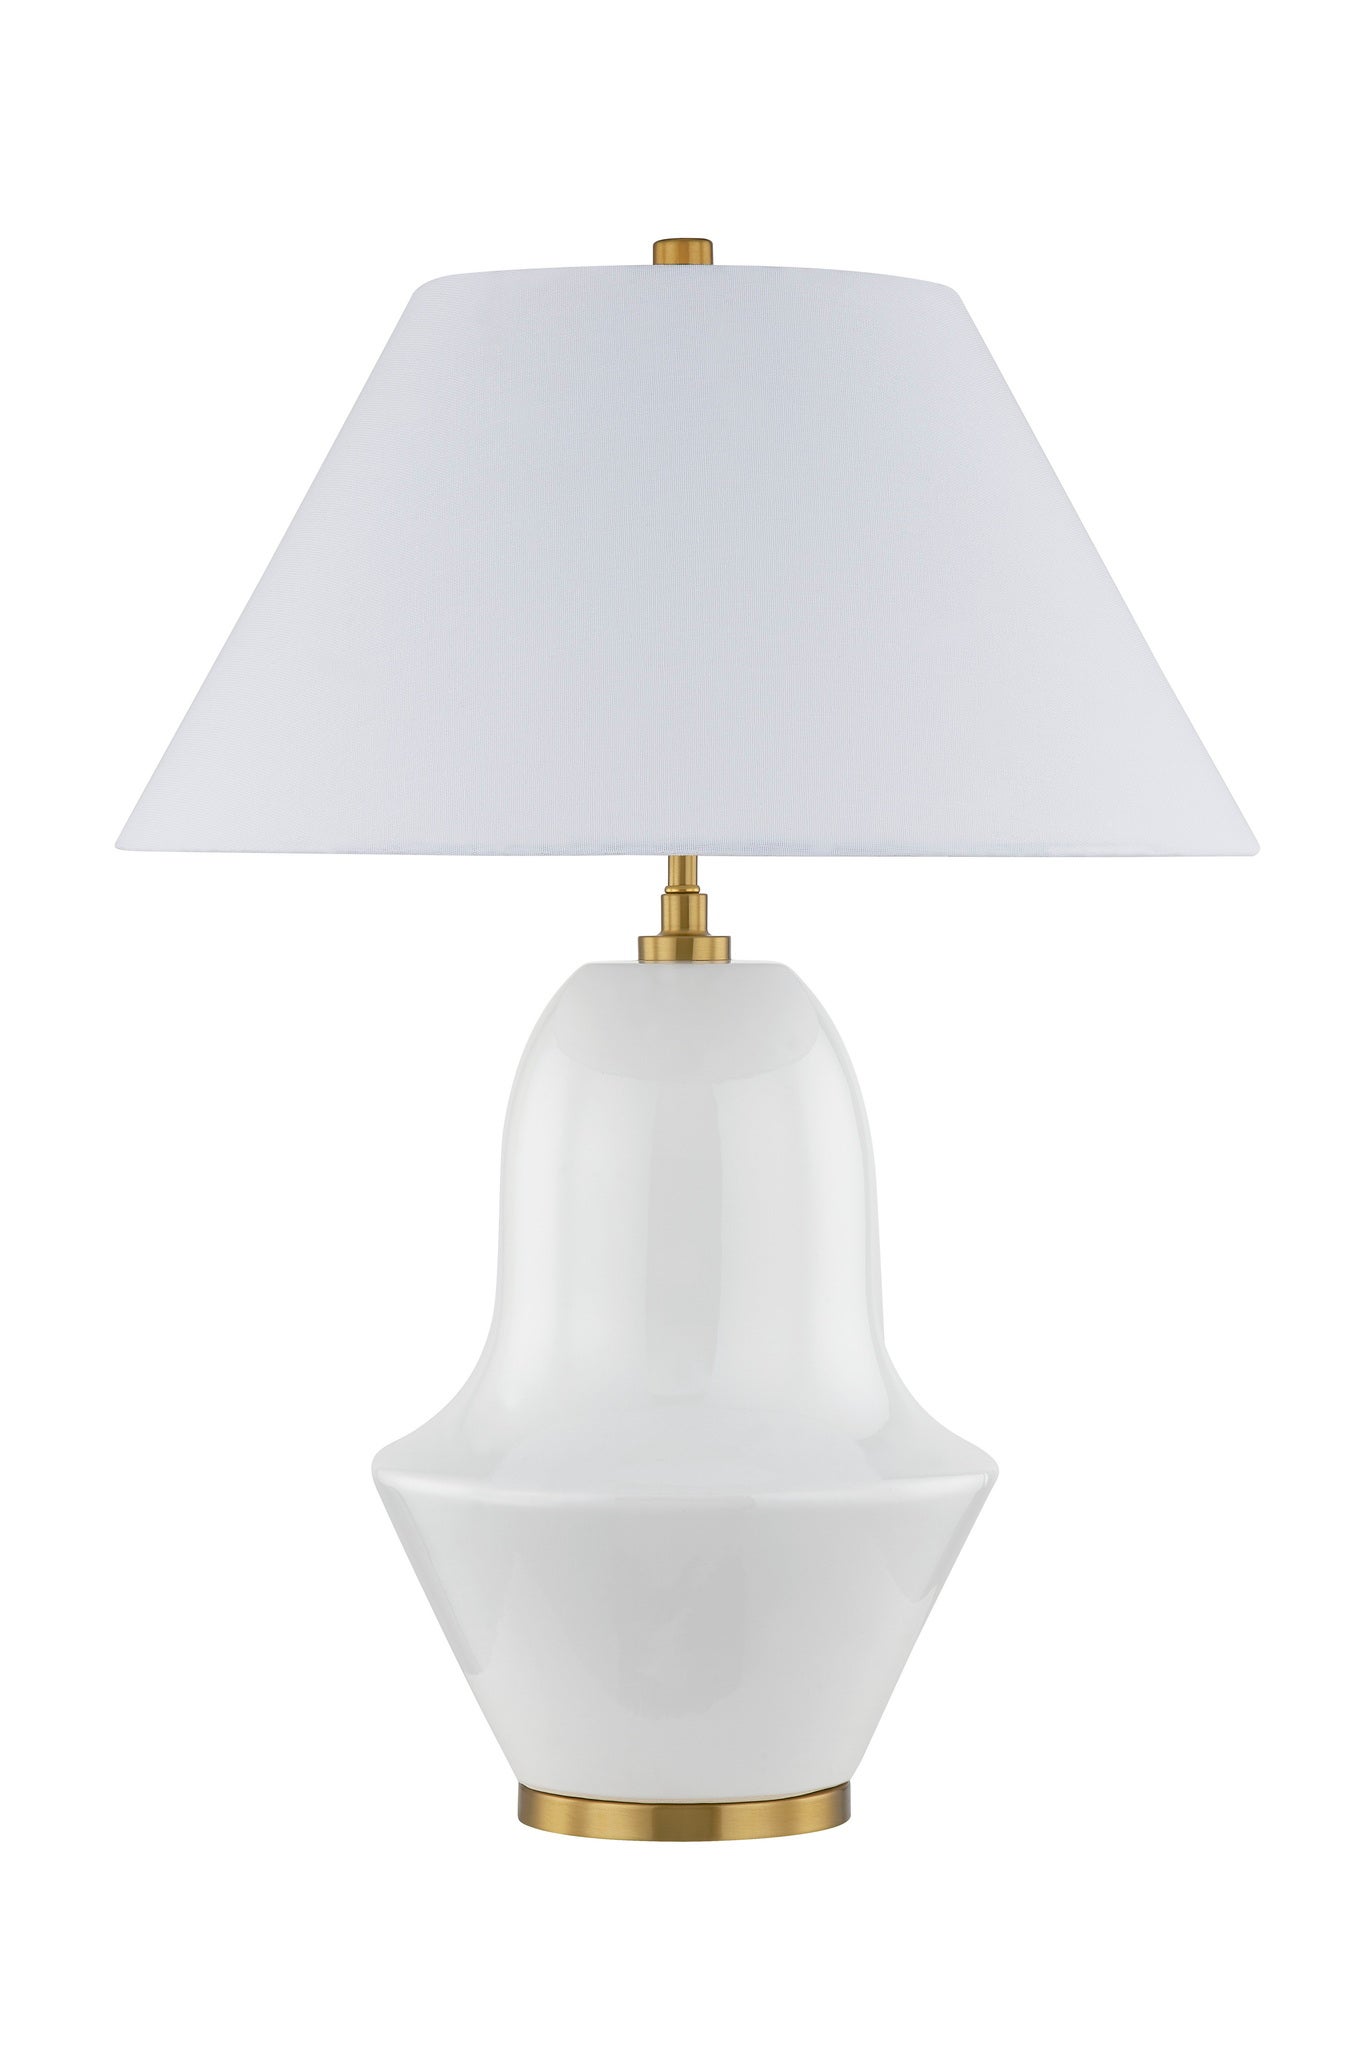 12+ Forty West Table Lamps